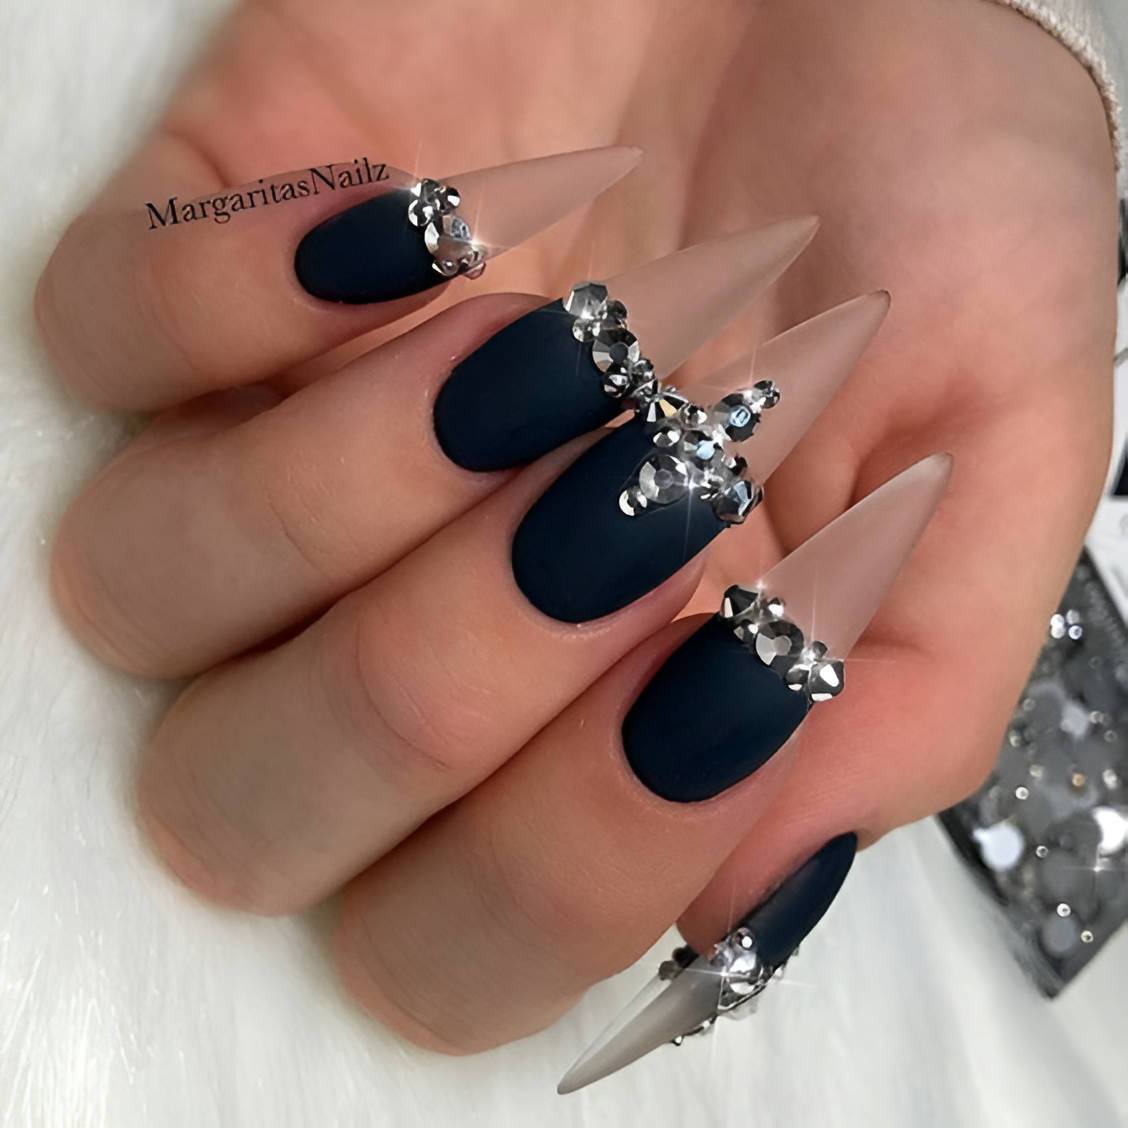 Stunning Stiletto Nail Designs Nobody Can Resist - 197